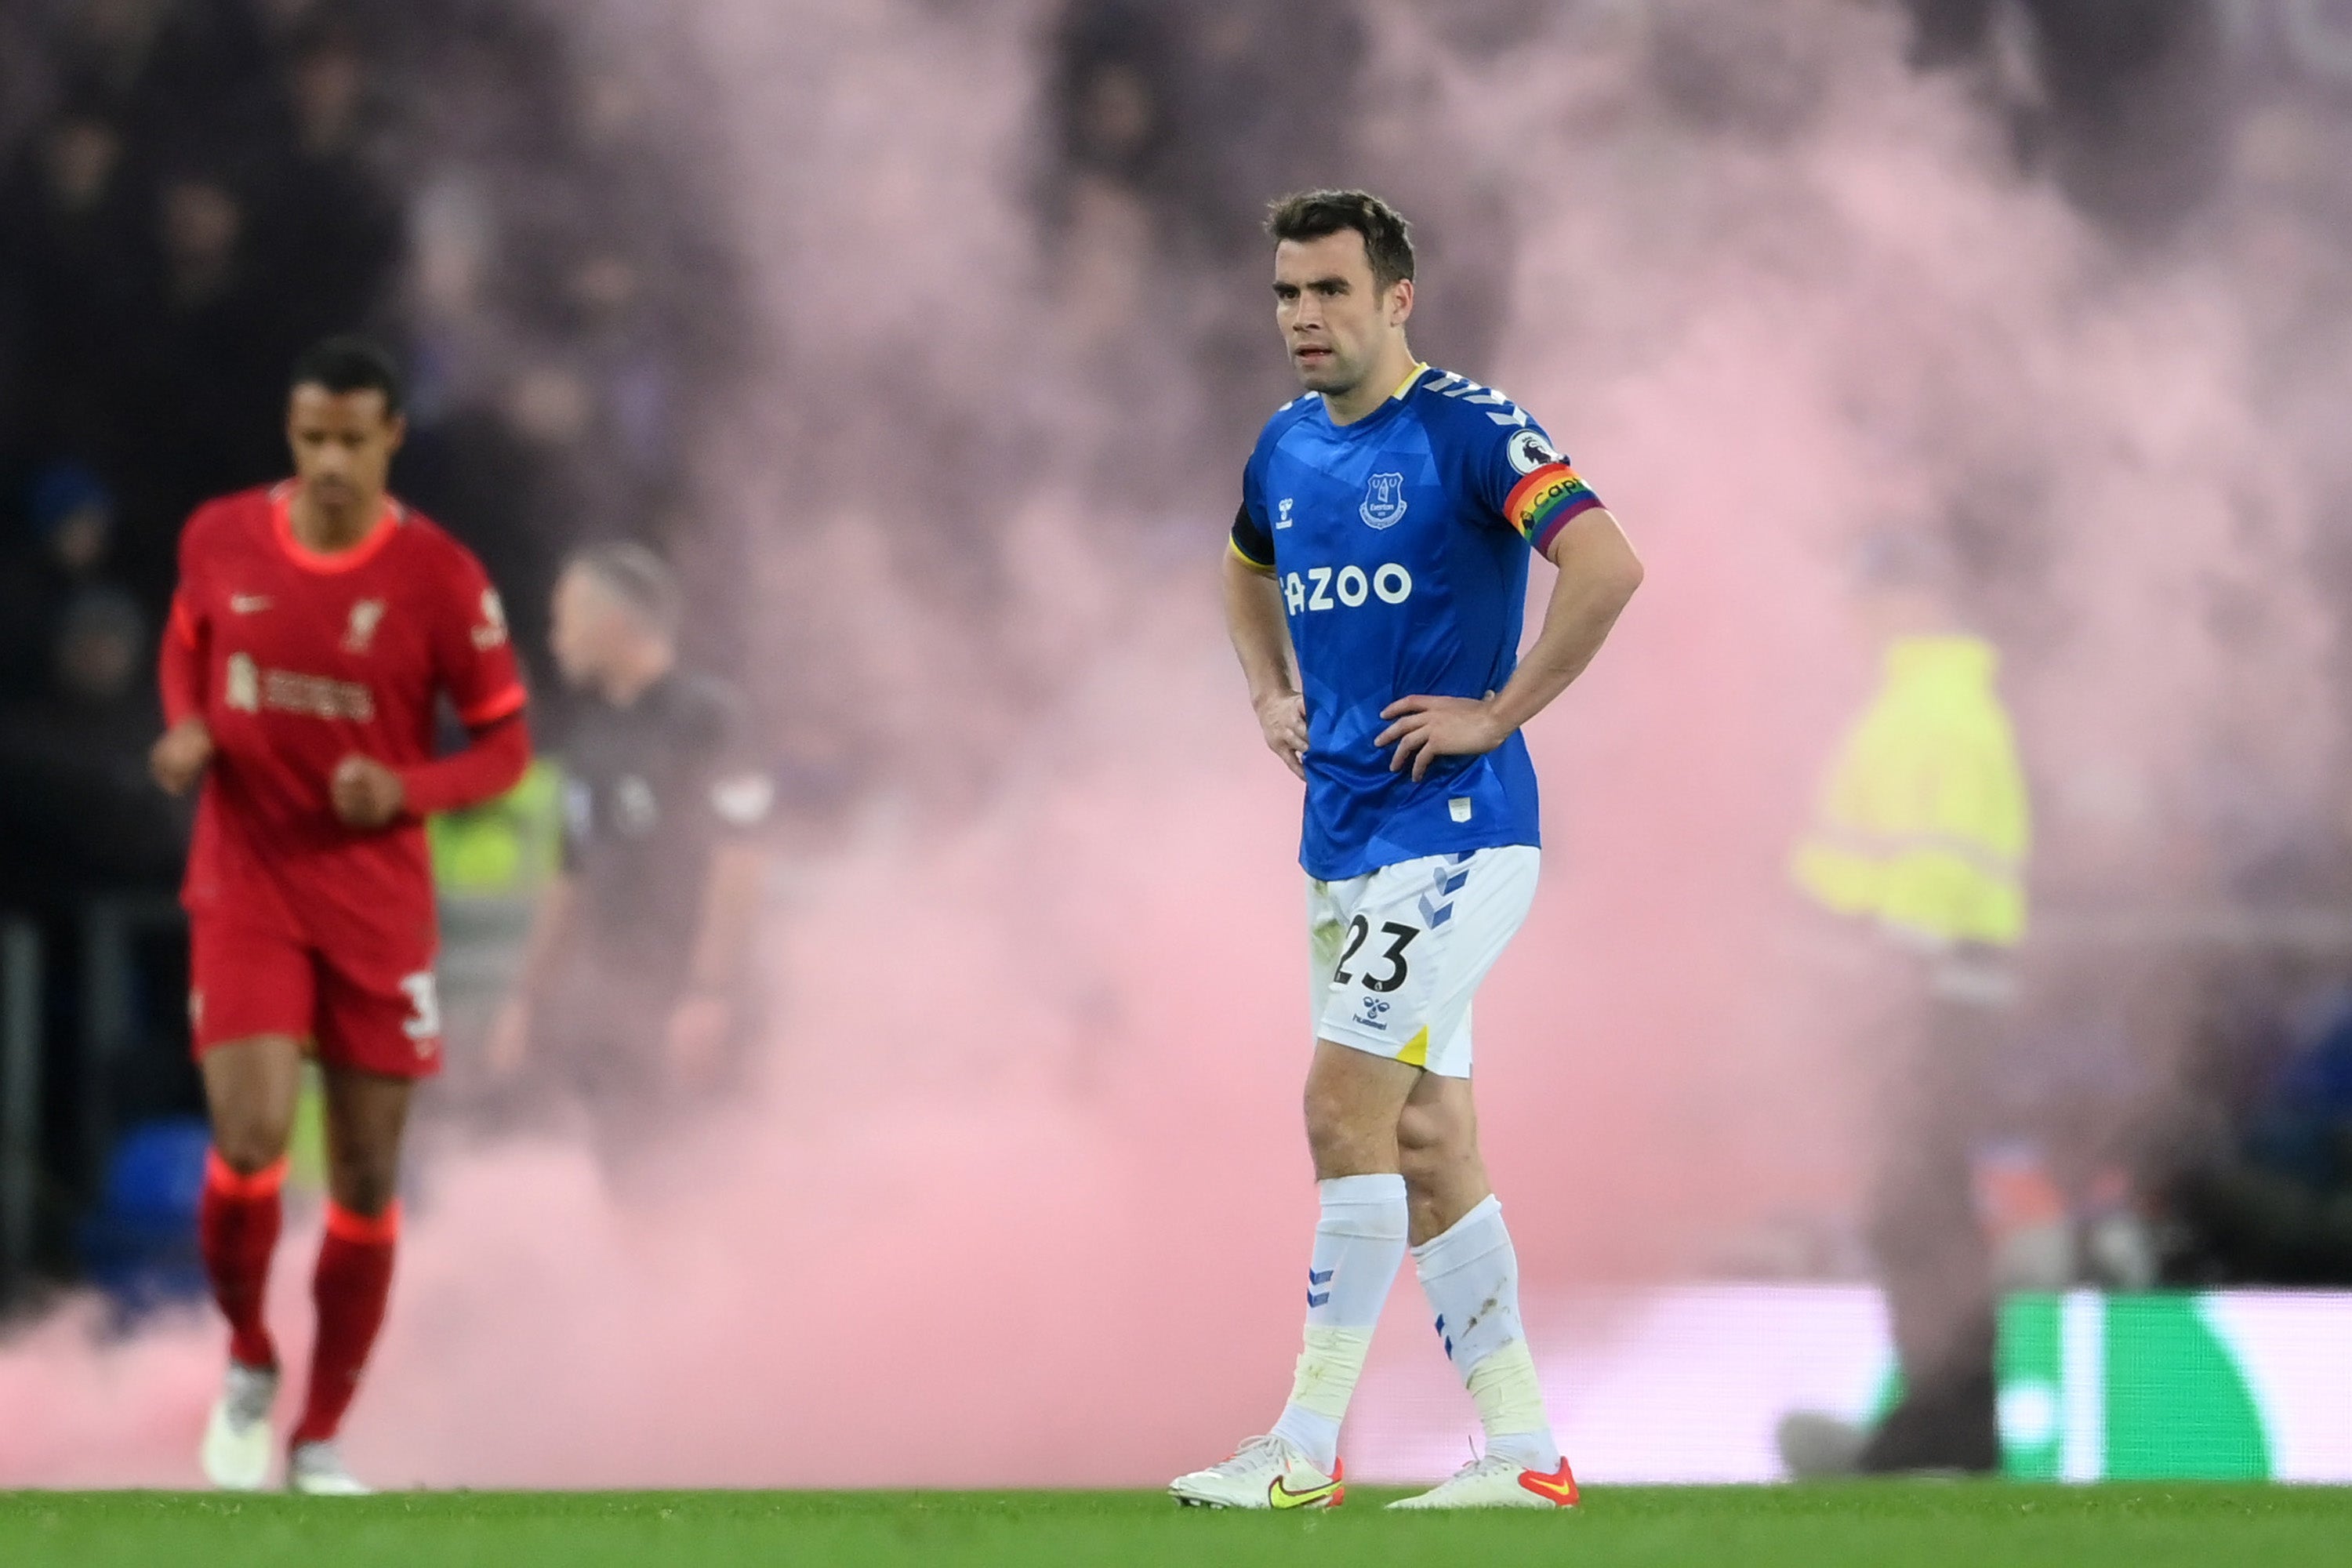 Seamus Coleman of Everton looks dejected after Diogo Jota’s goal wrapped up a 4-1 win for Liverpool at Goodison Park on 1 December 2021